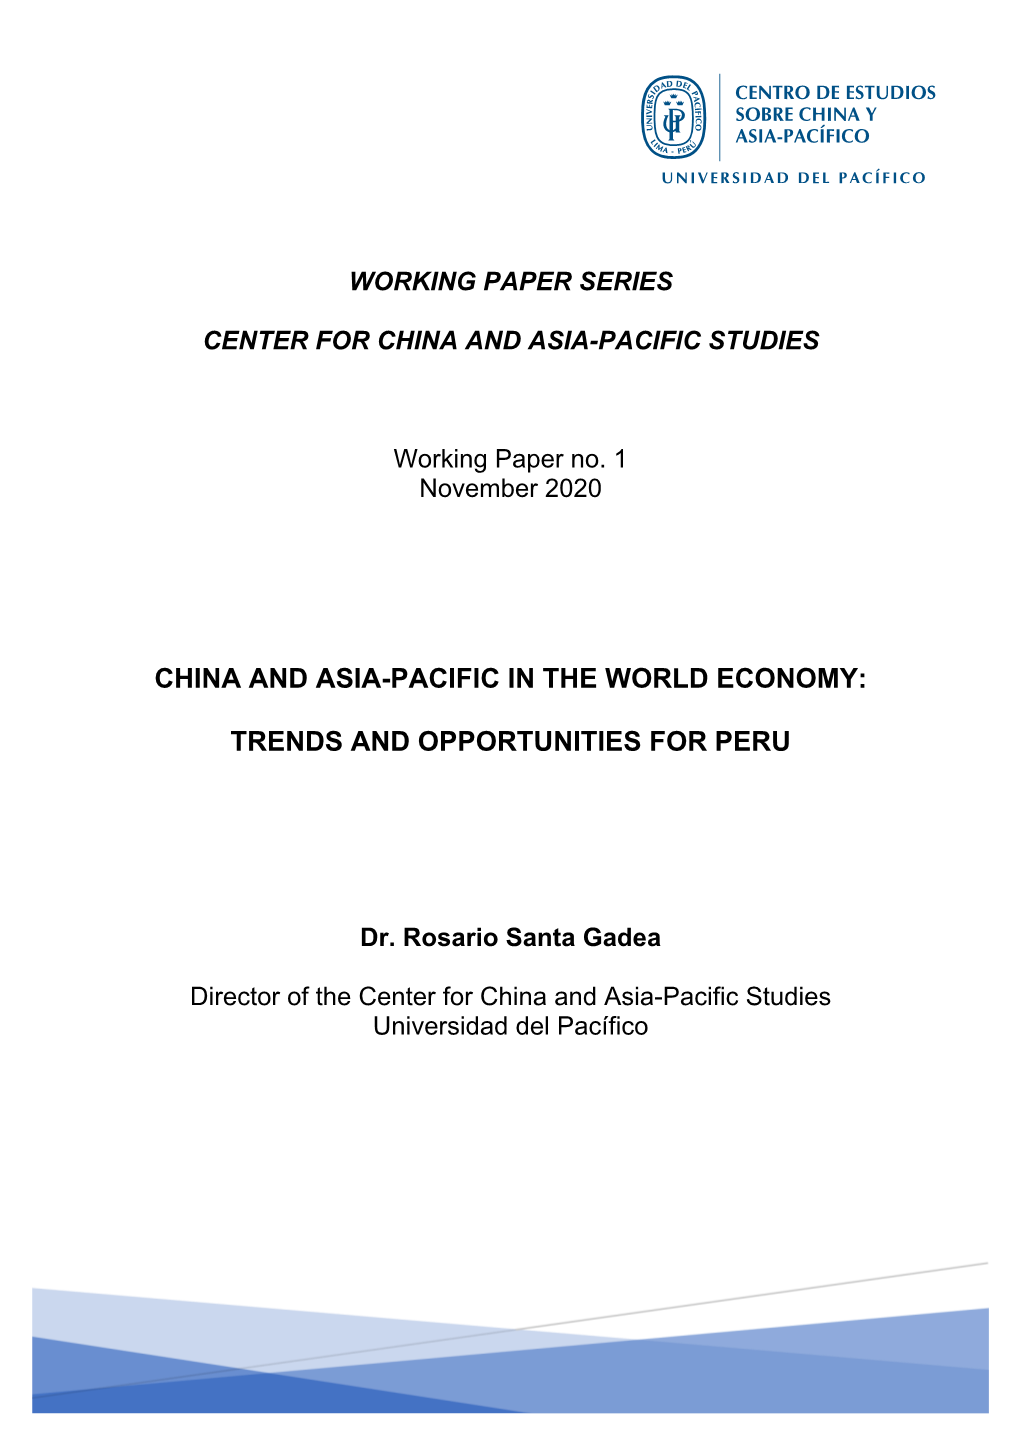 China and Asia-Pacific in the World Economy